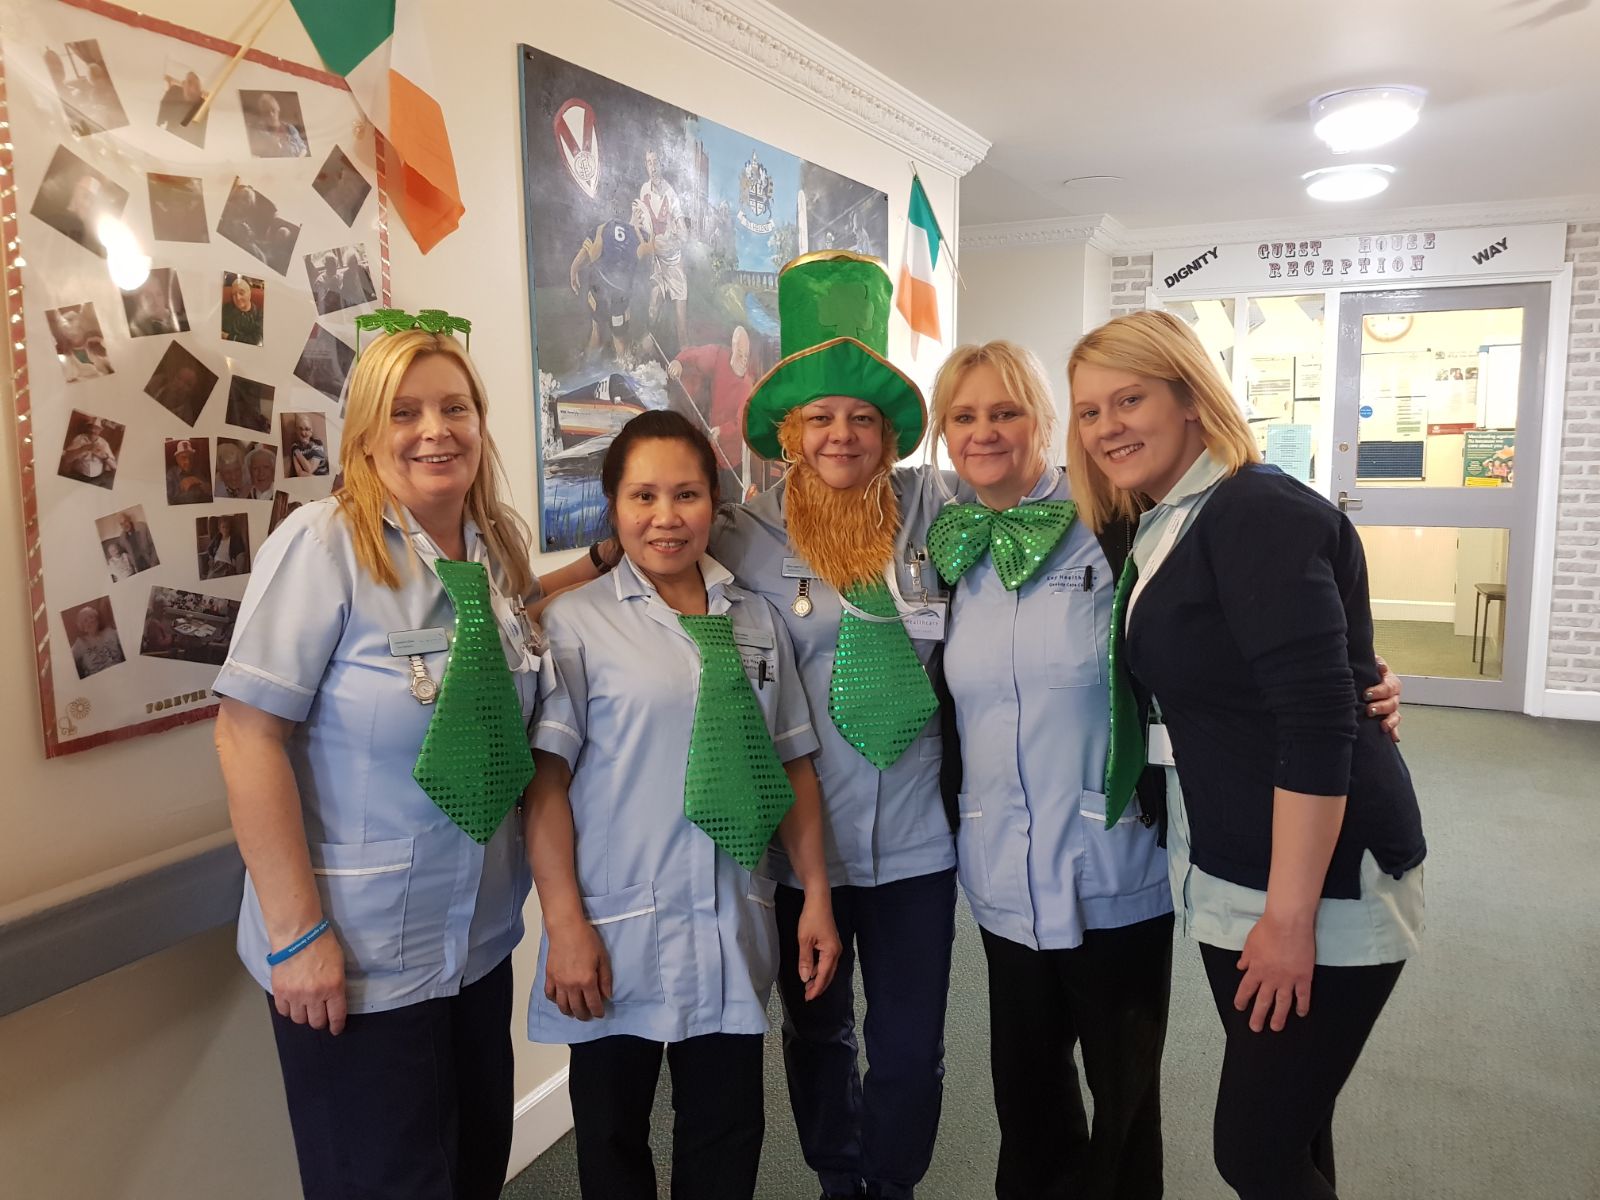 St Patrick's Day 2018: Key Healthcare is dedicated to caring for elderly residents in safe. We have multiple dementia care homes including our care home middlesbrough, our care home St. Helen and care home saltburn. We excel in monitoring and improving care levels.